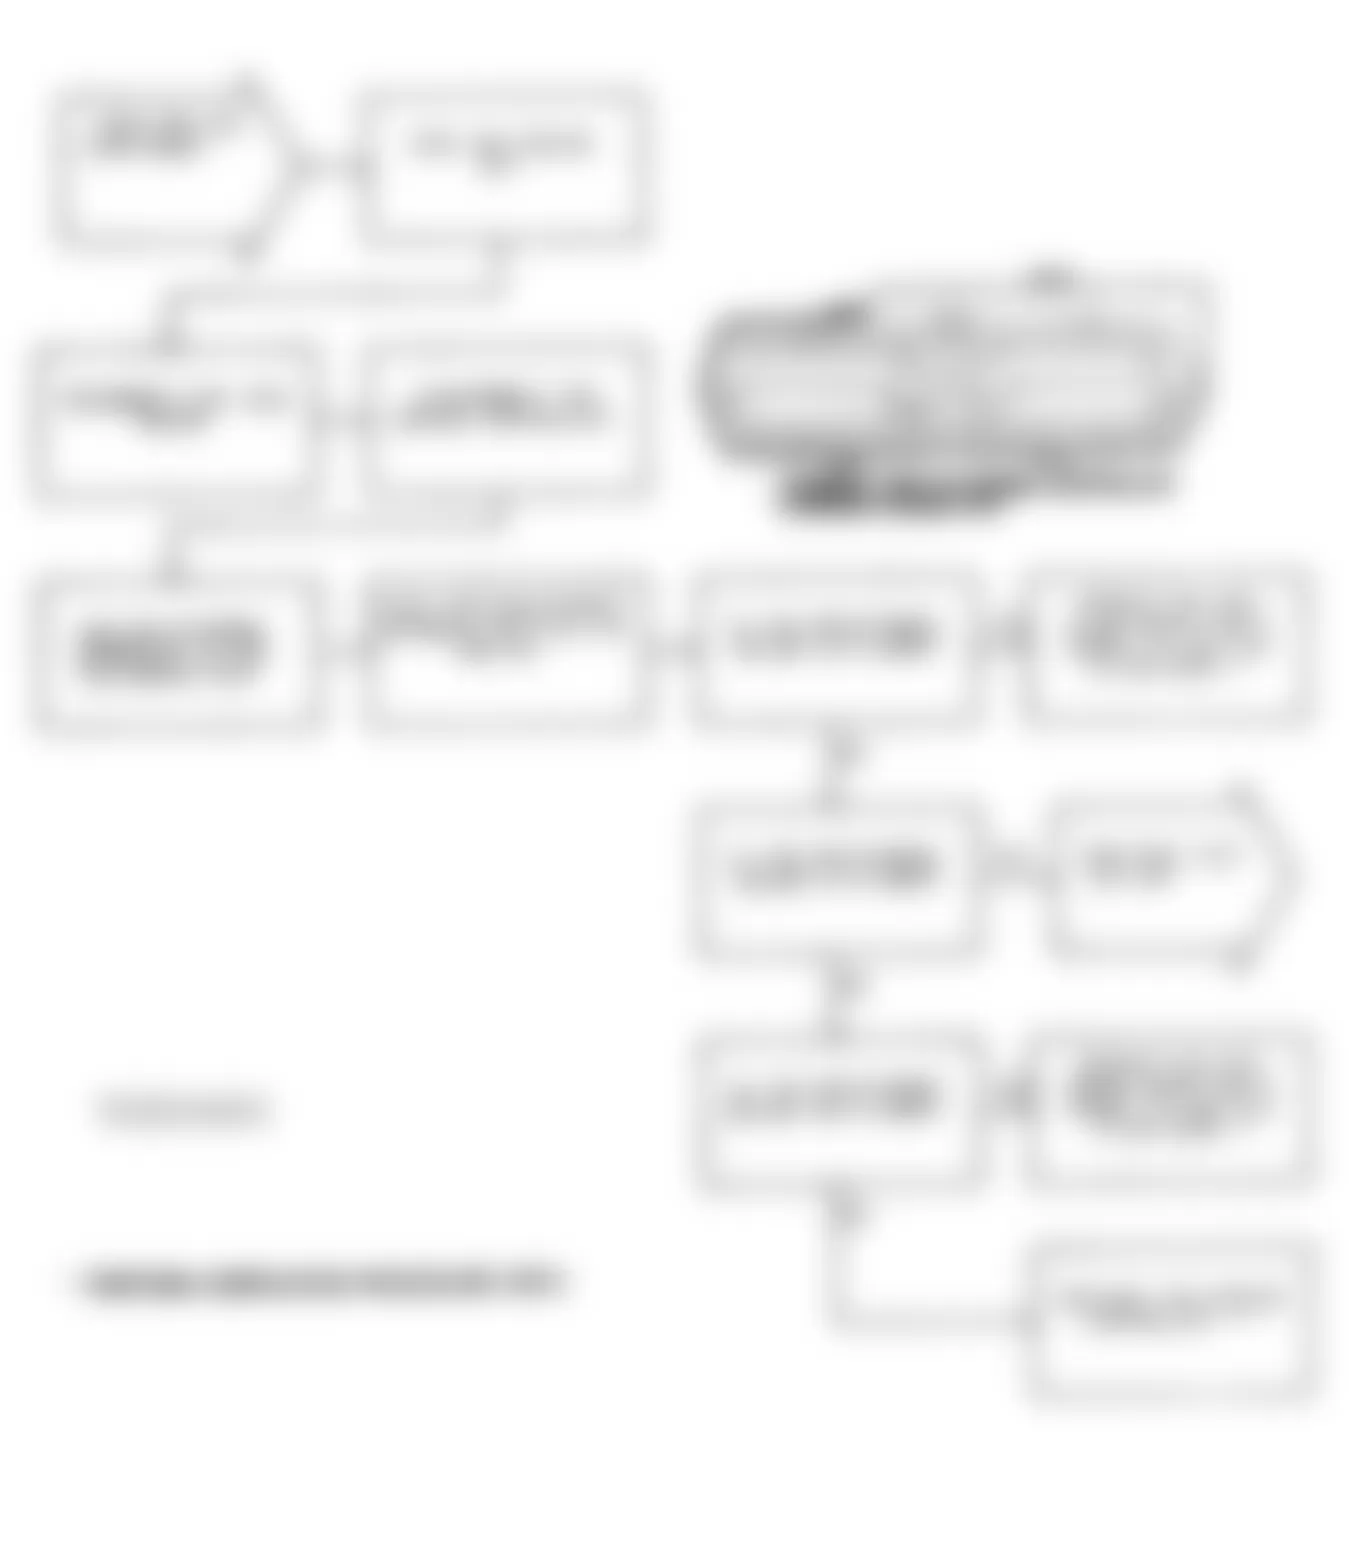 Chrysler New Yorker Fifth Avenue 1991 - Component Locations -  Test DR-14A Code 25: Flowchart (3 of 4)